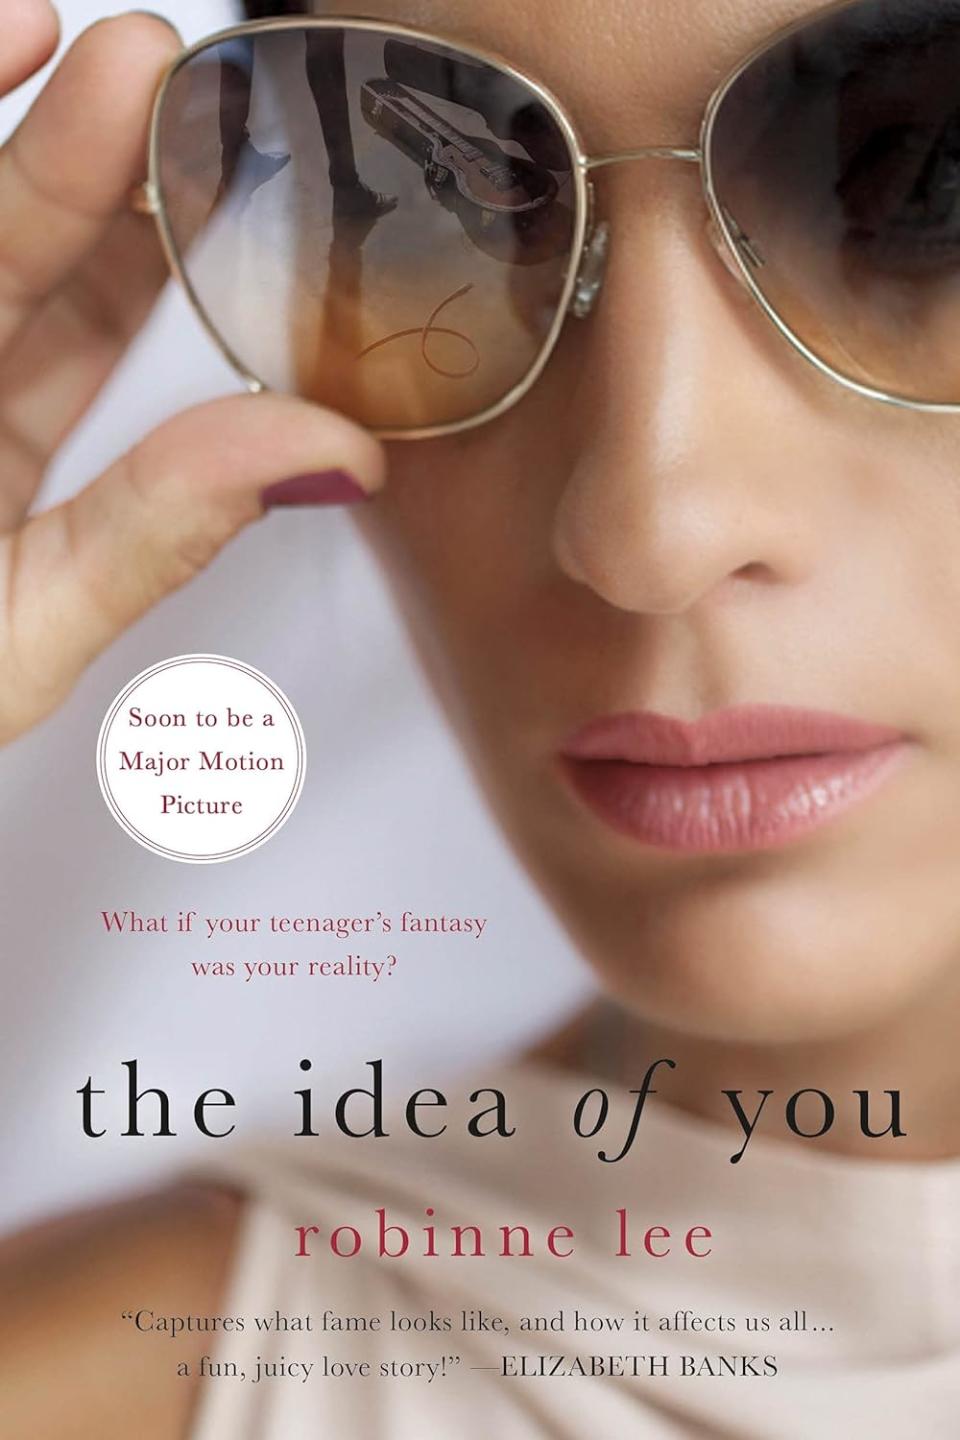 The Best Book-to-Screen Adaptations: 'The Idea of You,' 'Apples Never Fall'